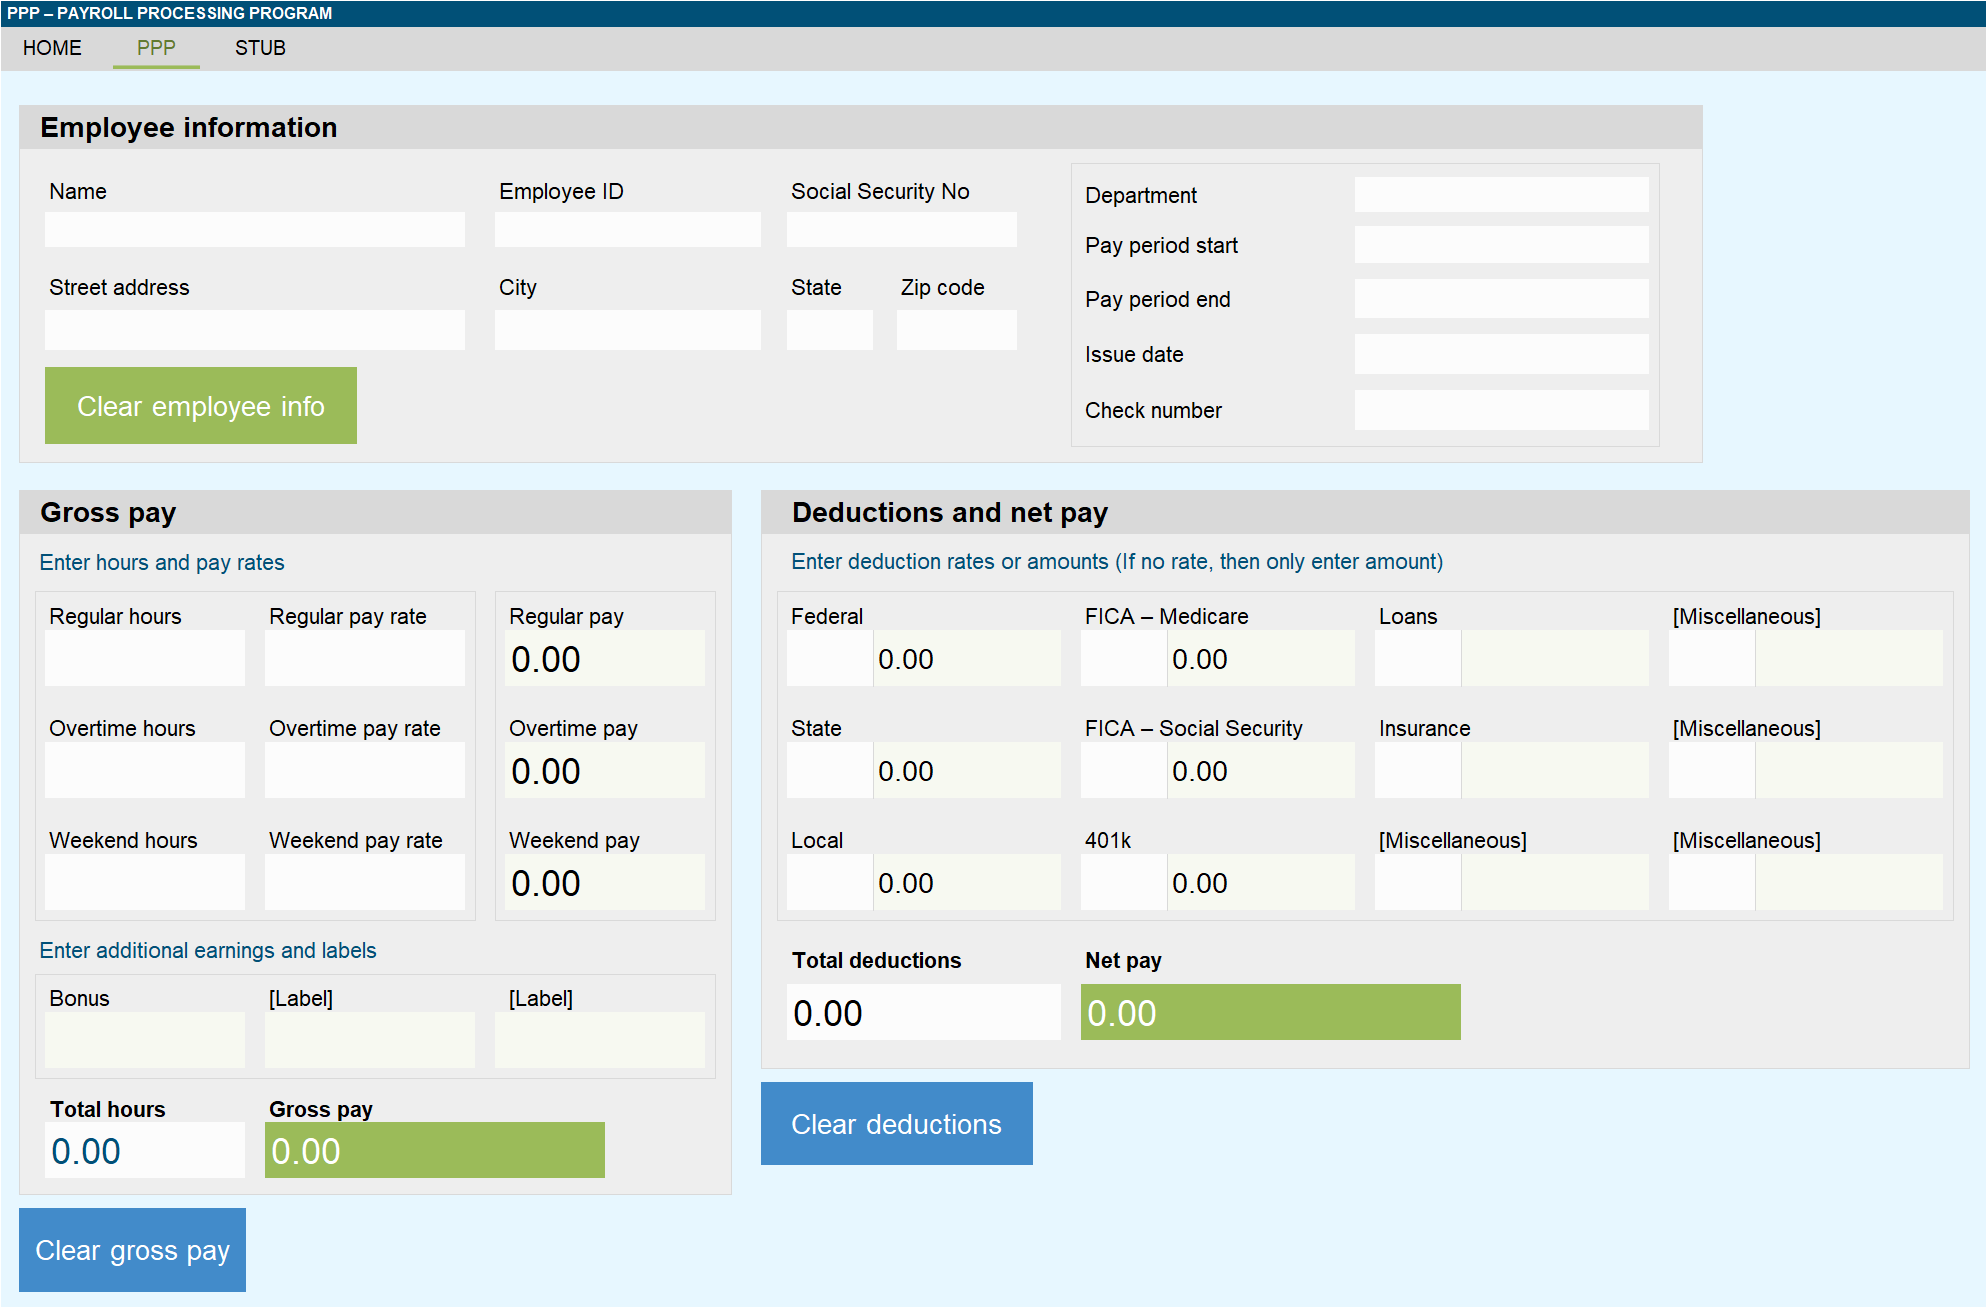 Product images - PPP - Payroll Processing Program - screenshot 1 - Techronology